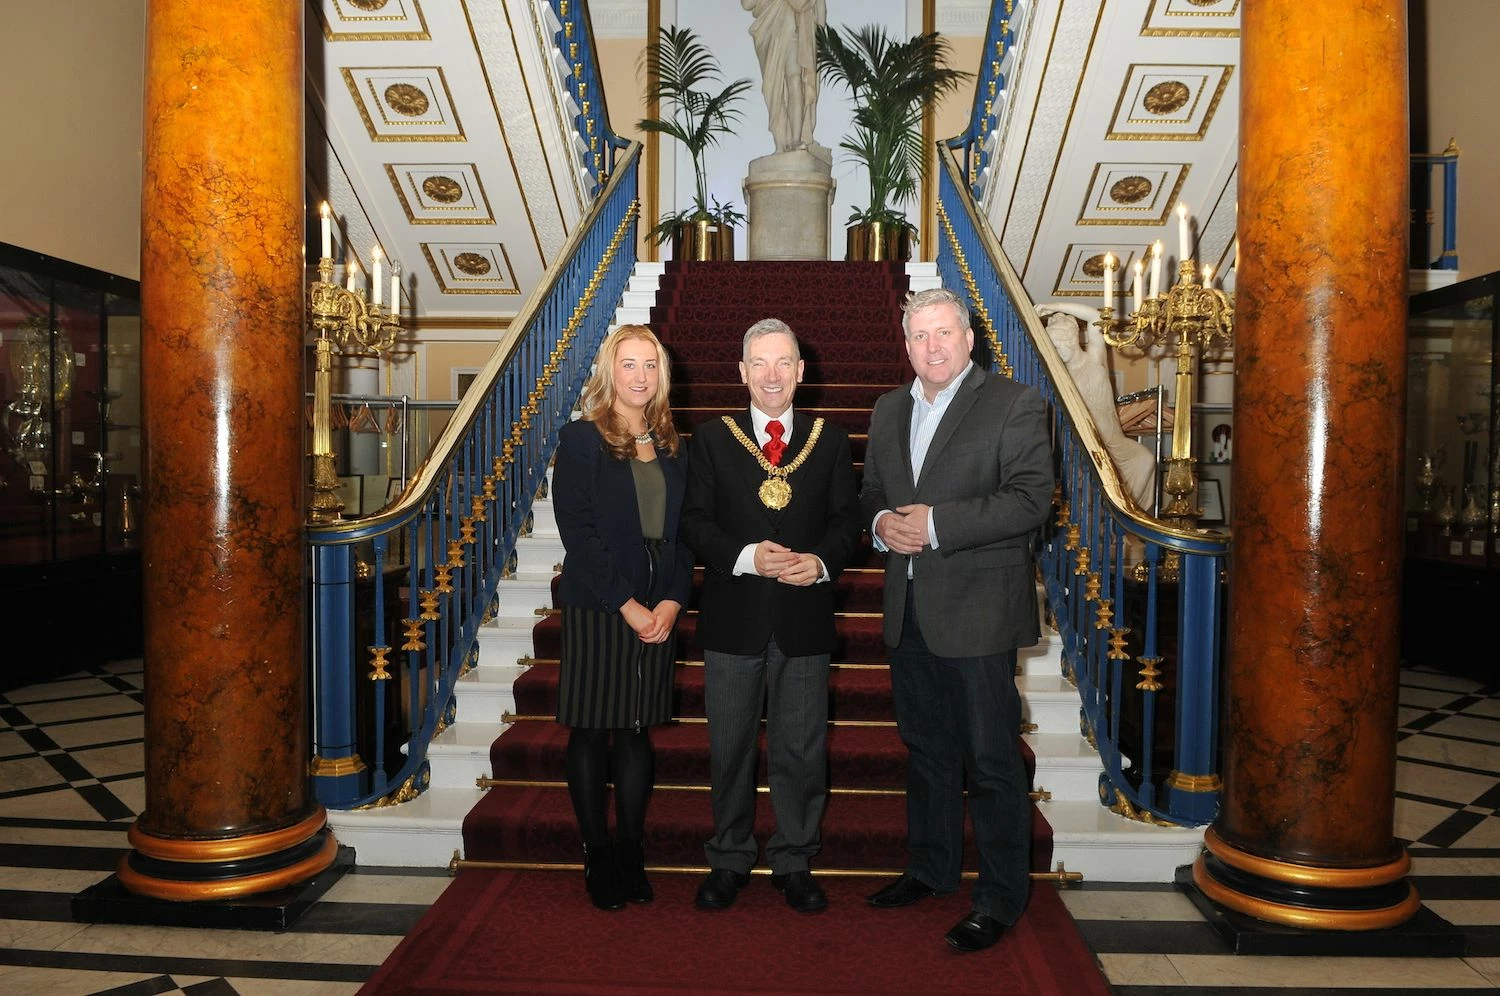 Helen Lowry, Lord Mayor of Liverpool, Councillor Gary Millar and Adam Franklin 